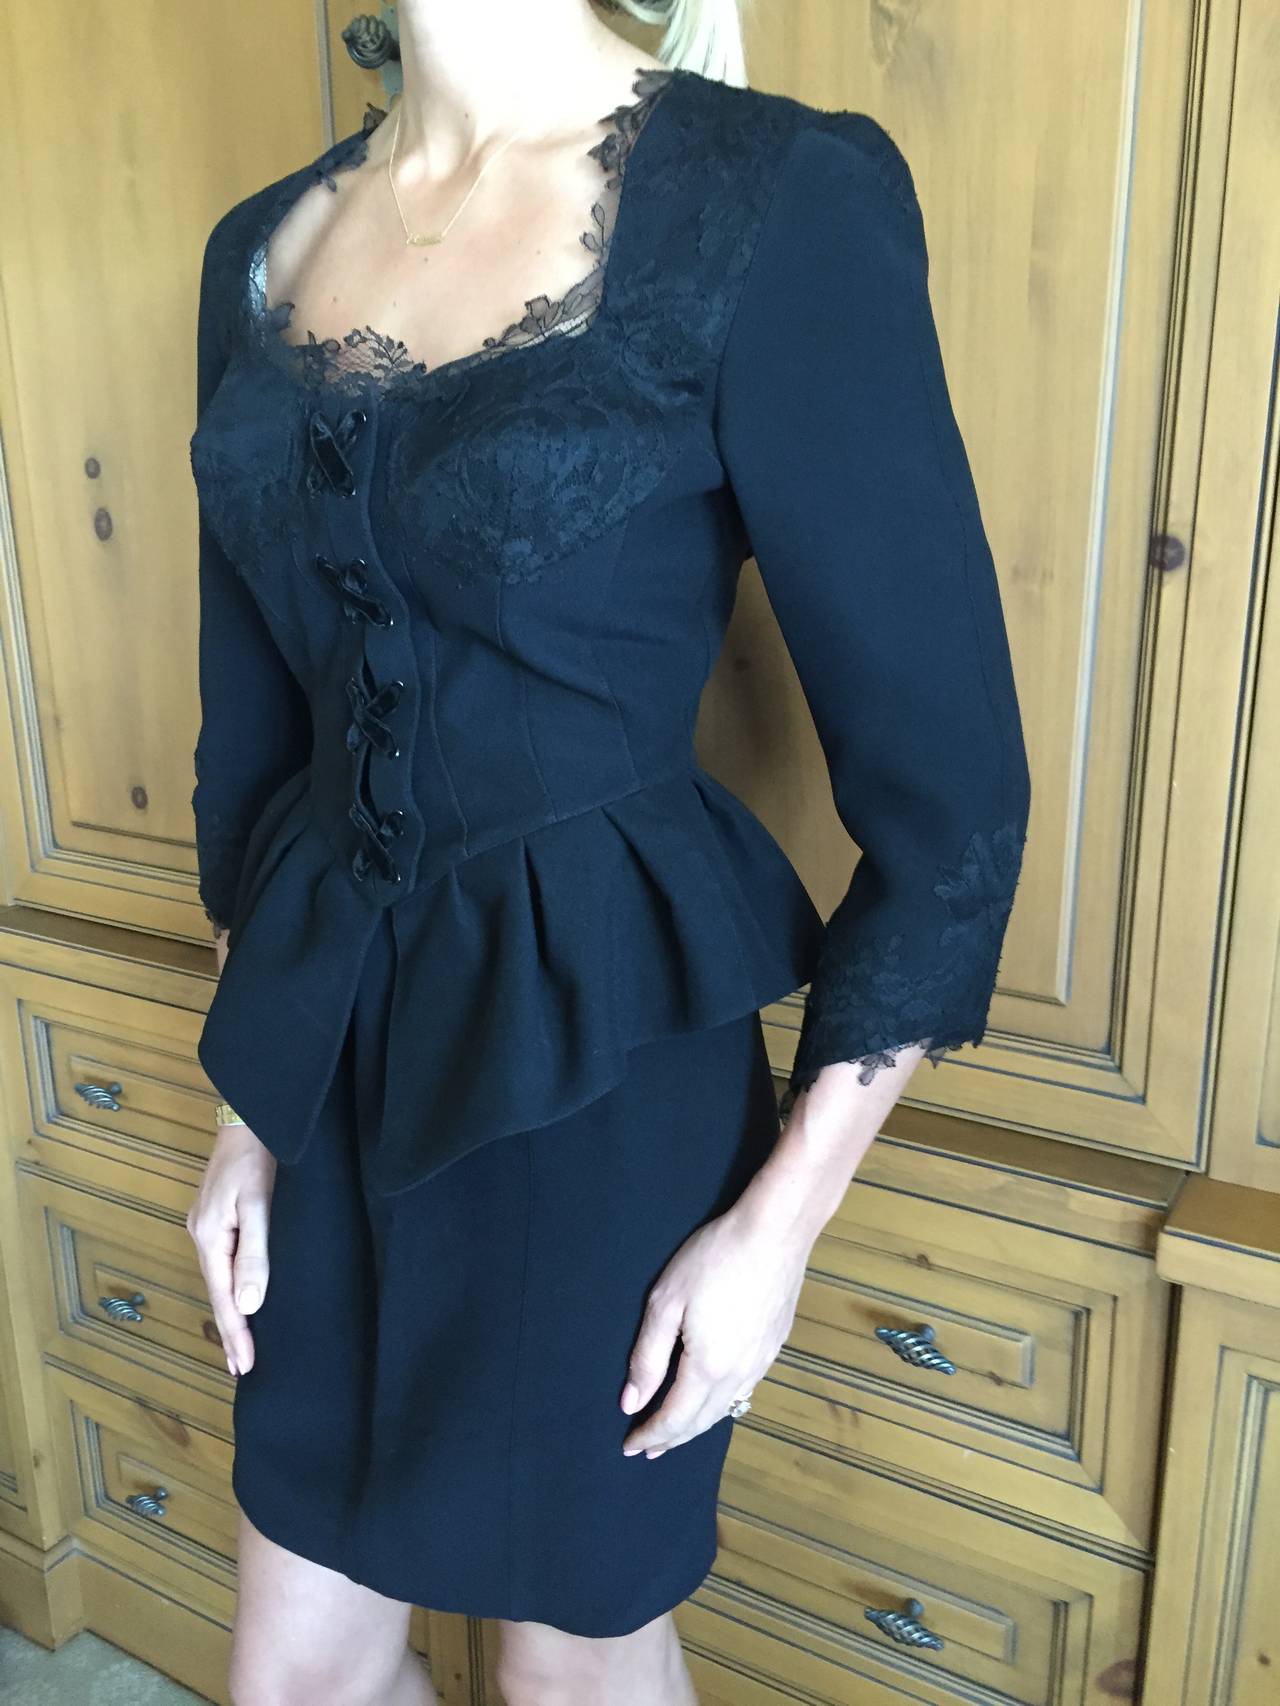 Thierry Mugler Black Corset Lace Peplum Suit.
This is so sweet. Black wool with contrasting black velvet and lace details.
So much prettier in person, black is hard to photograph in detail.